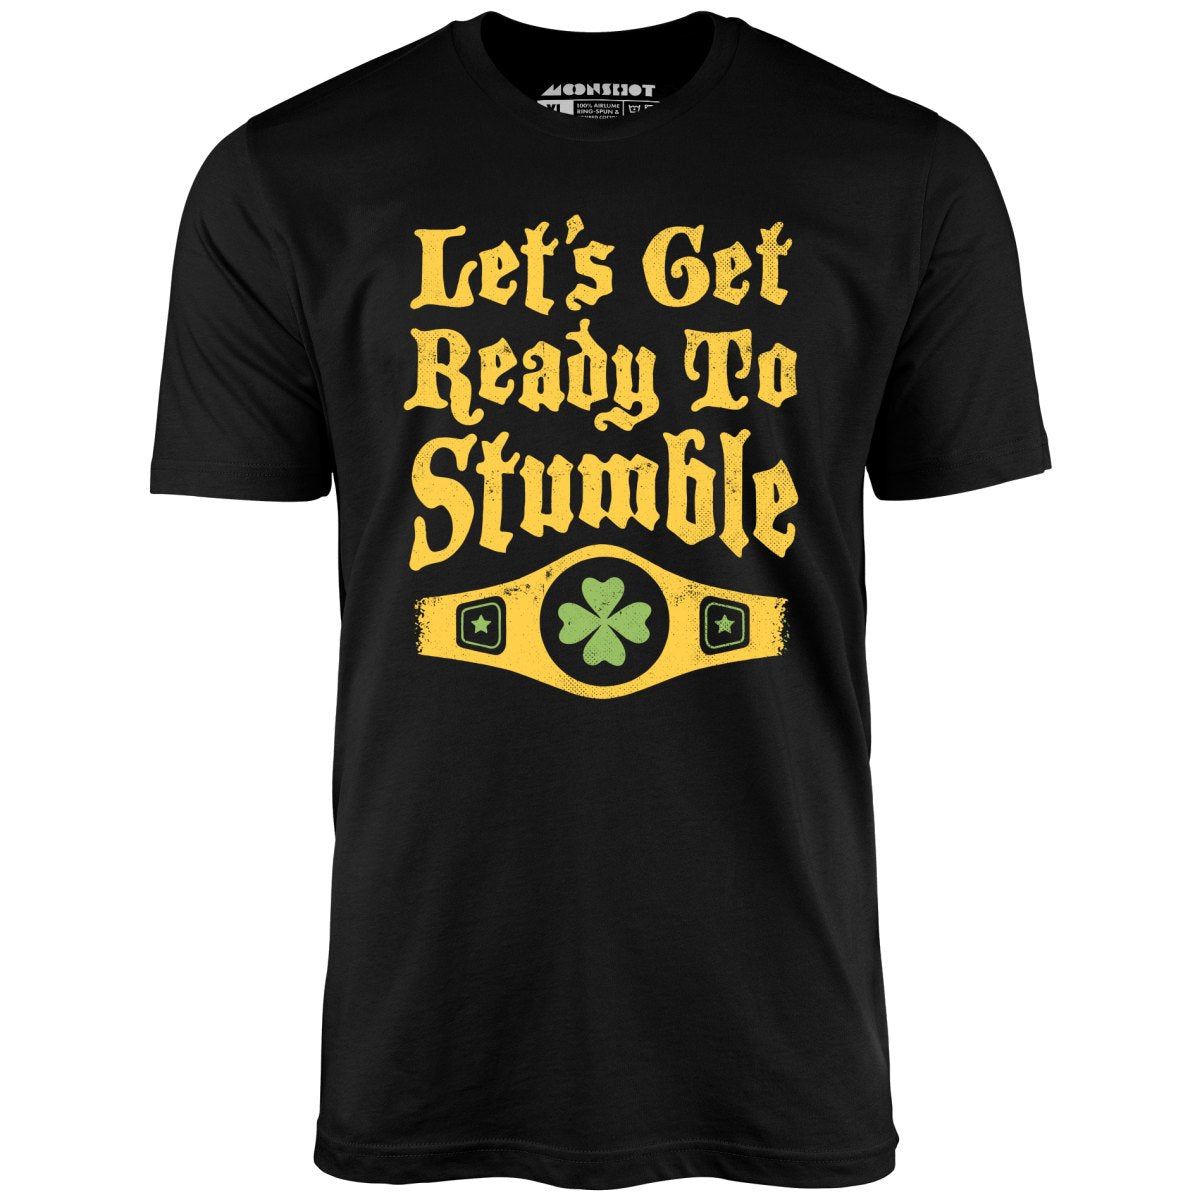 Let's Get Ready to Stumble - Unisex T-Shirt